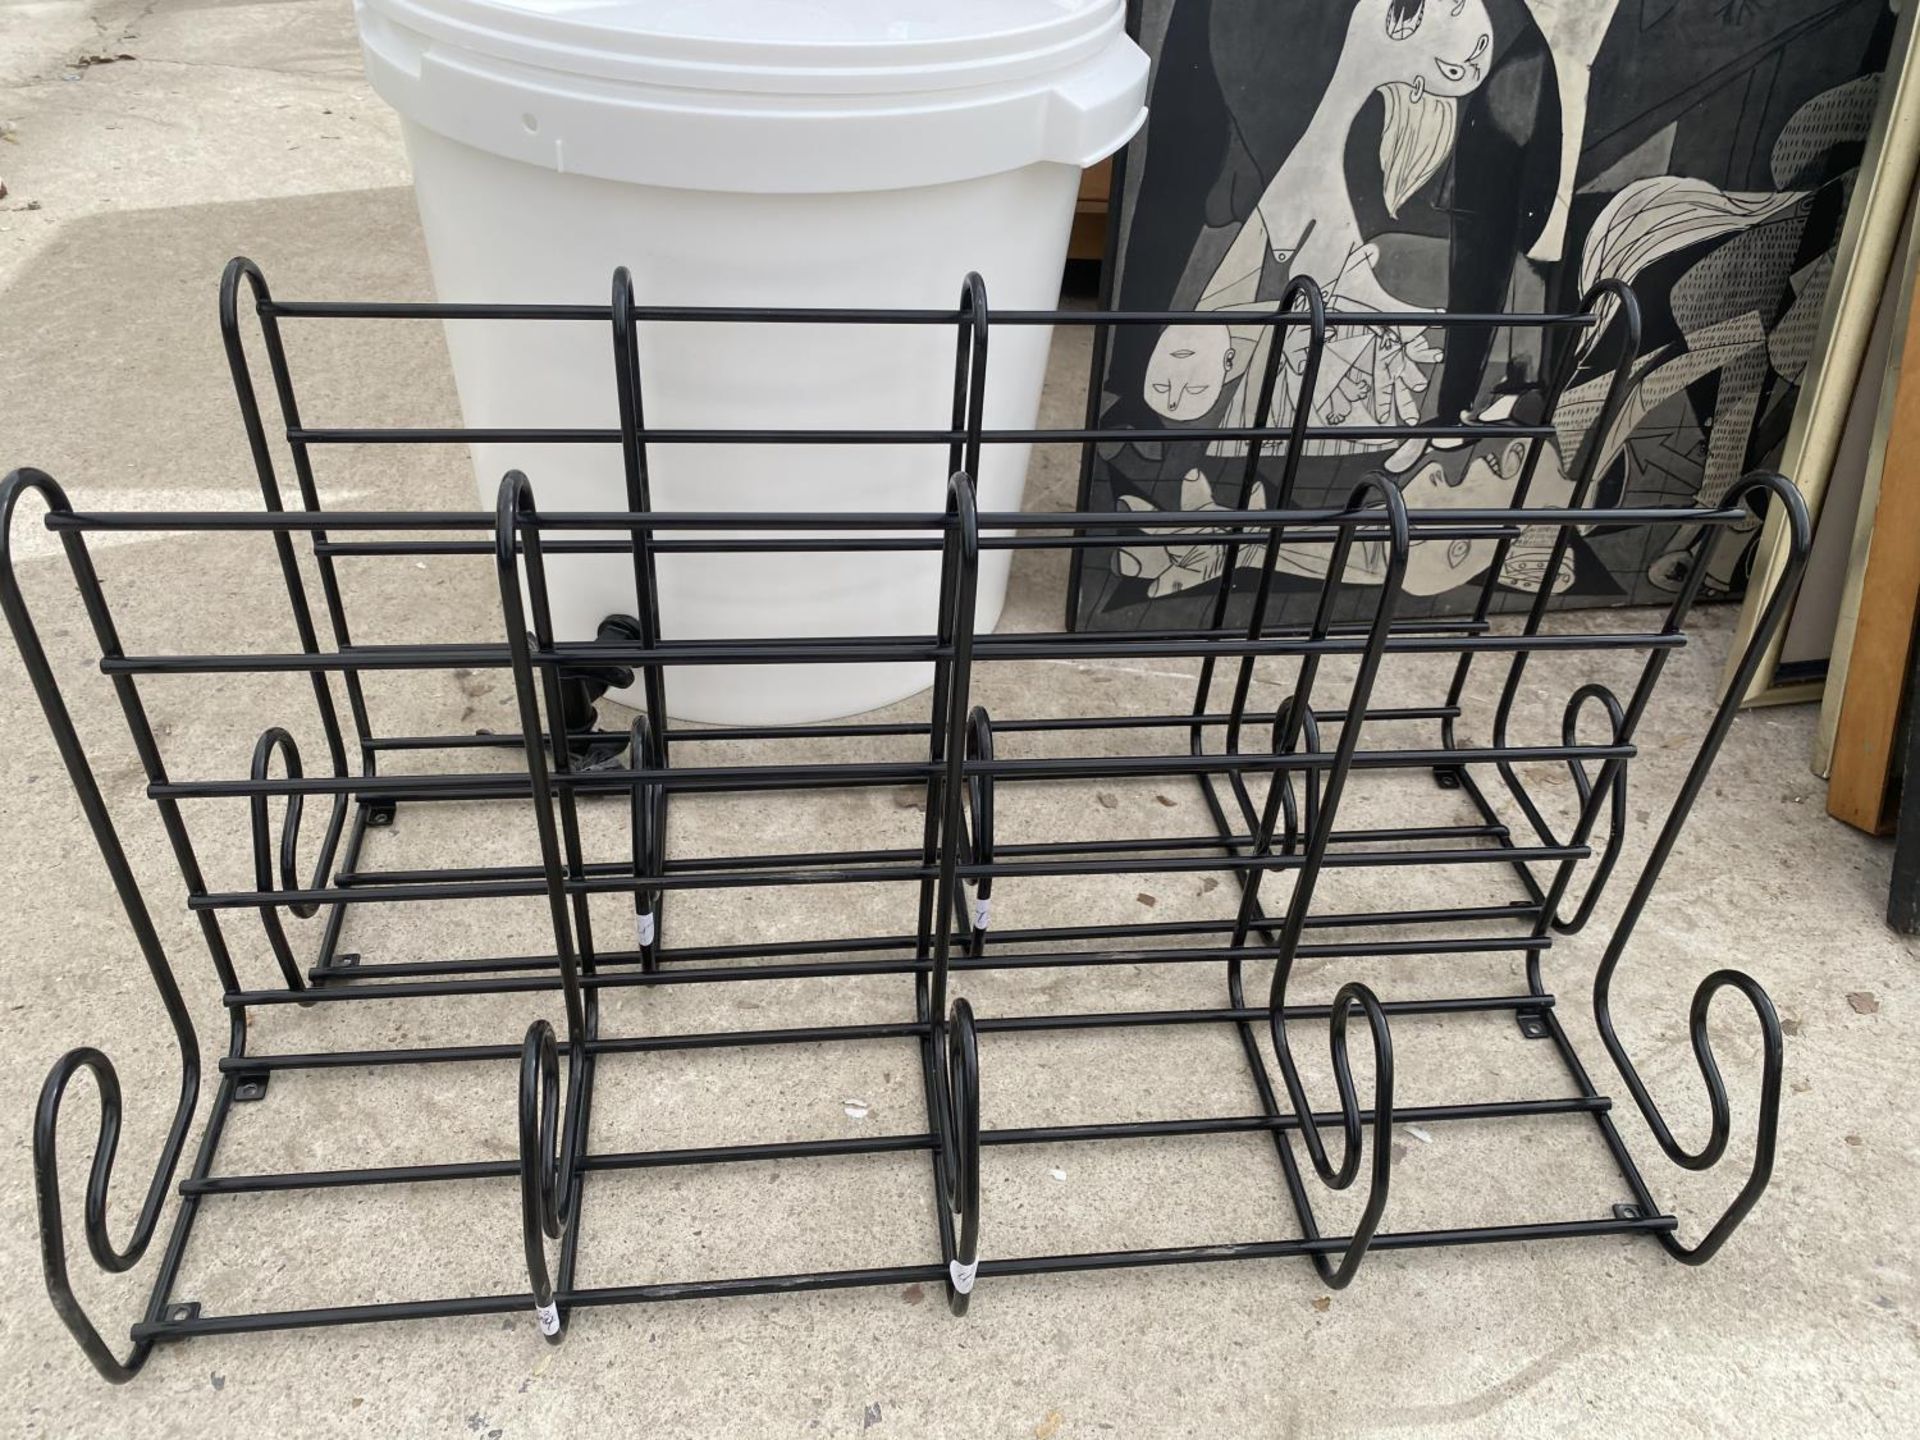 A PLASTIC WATER BUTT AND TWO METAL COAT RACKS - Image 2 of 3